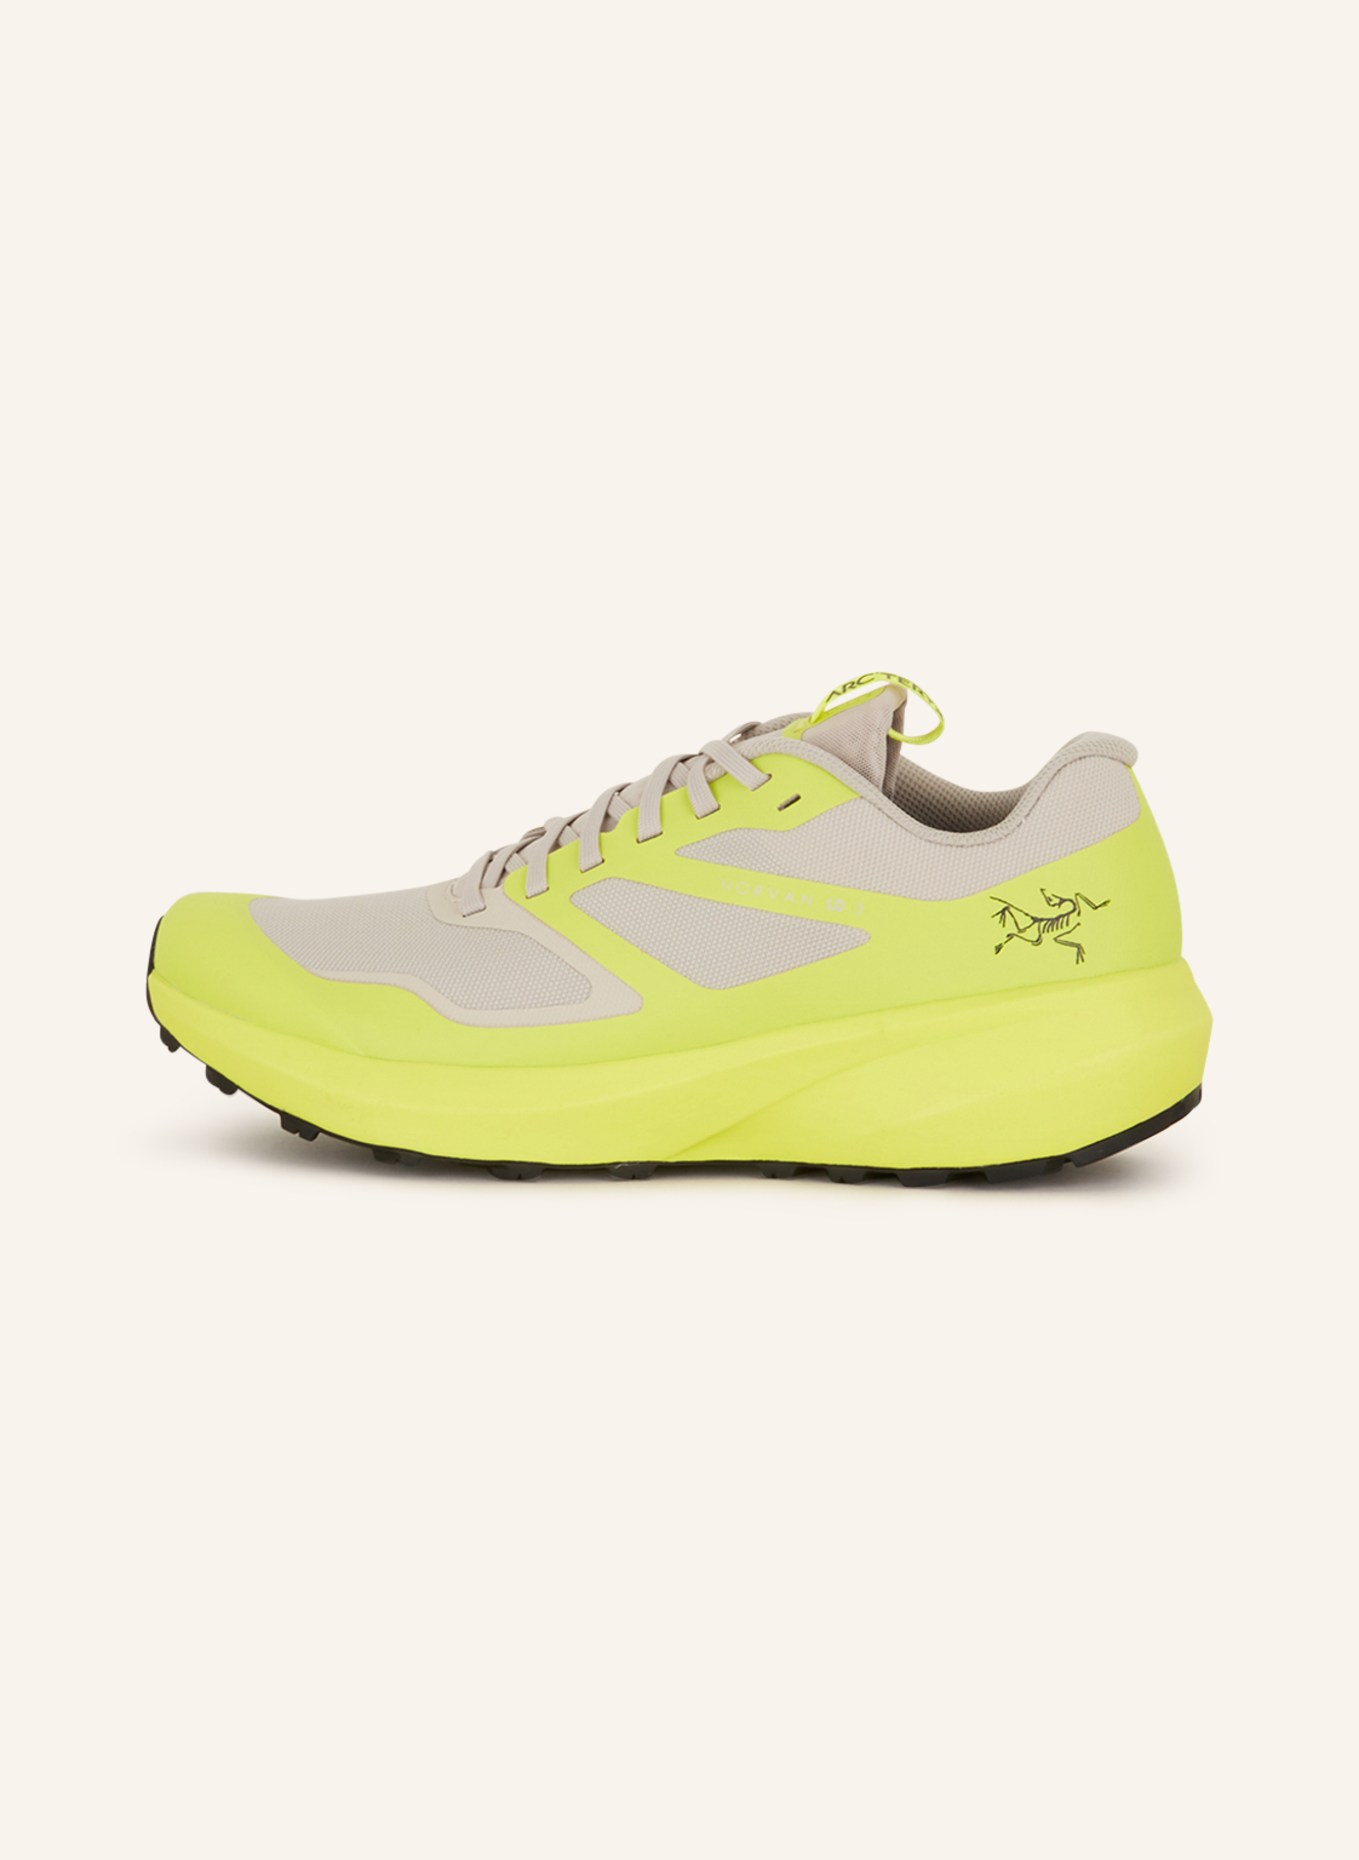 ARC'TERYX Trail running shoes NORVAN LD 3, Color: NEON YELLOW/ CREAM (Image 4)